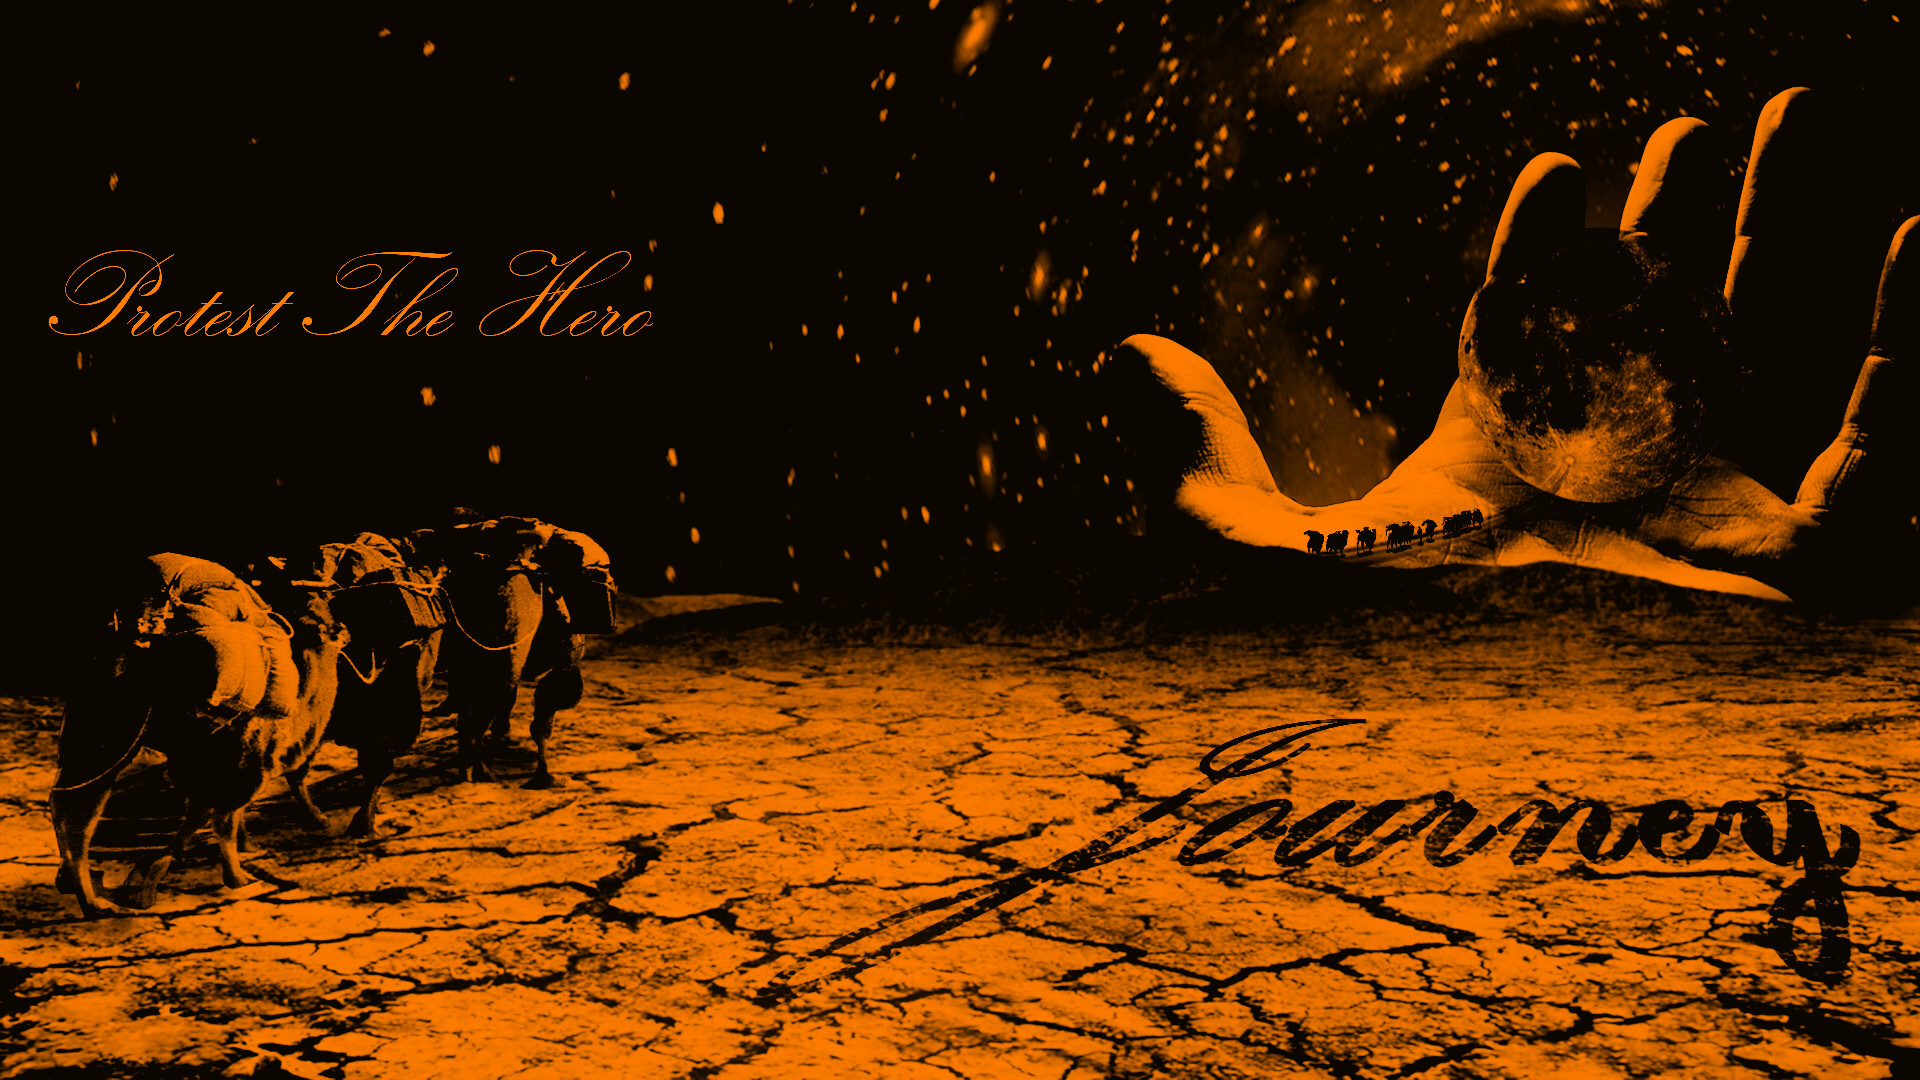 Protest The Hero Wallpapers